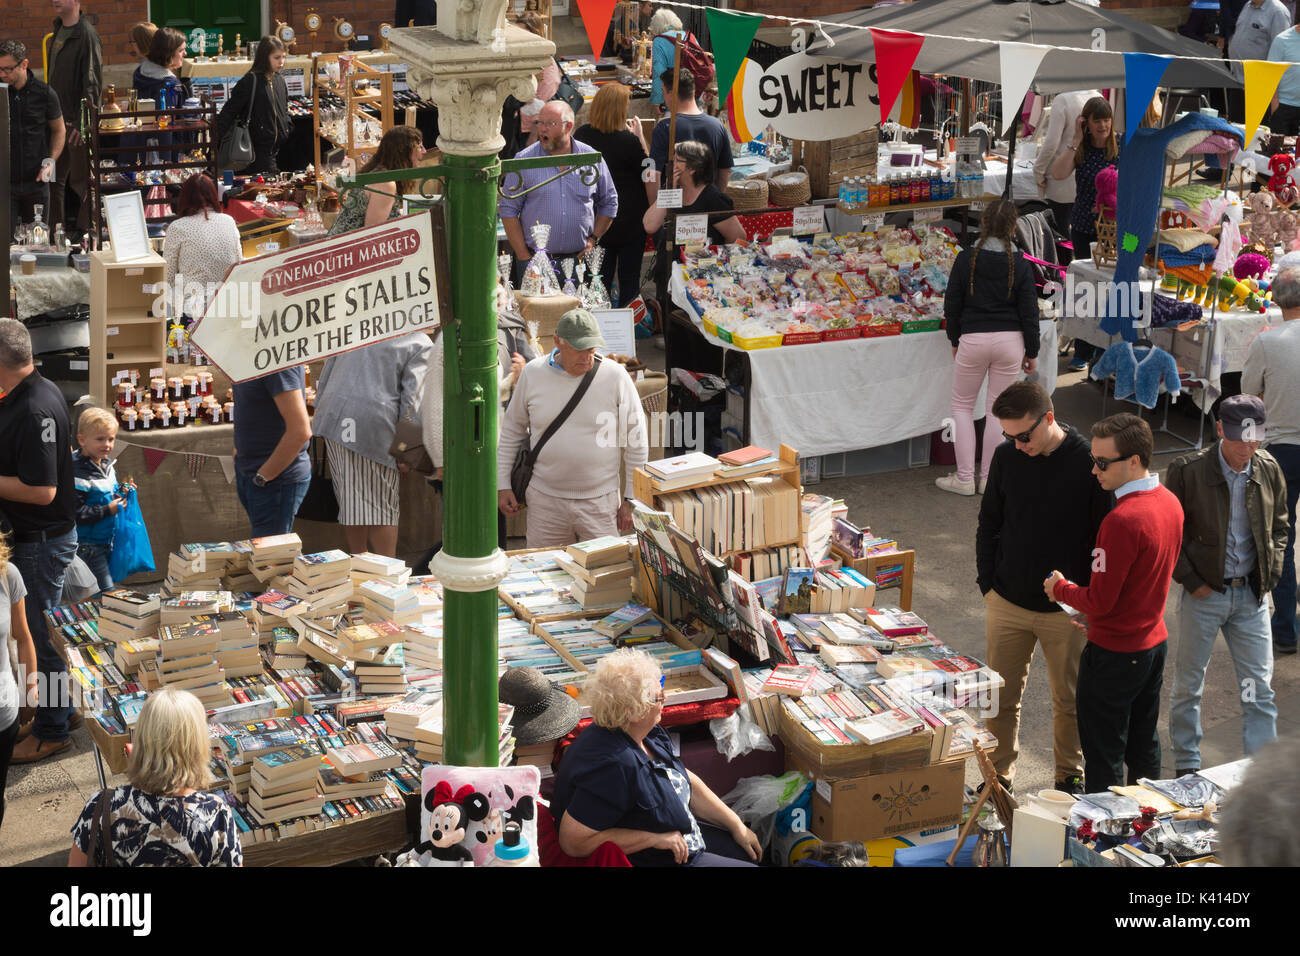 A busy scene at Tynemouth station market, north east England, UK Stock Photo